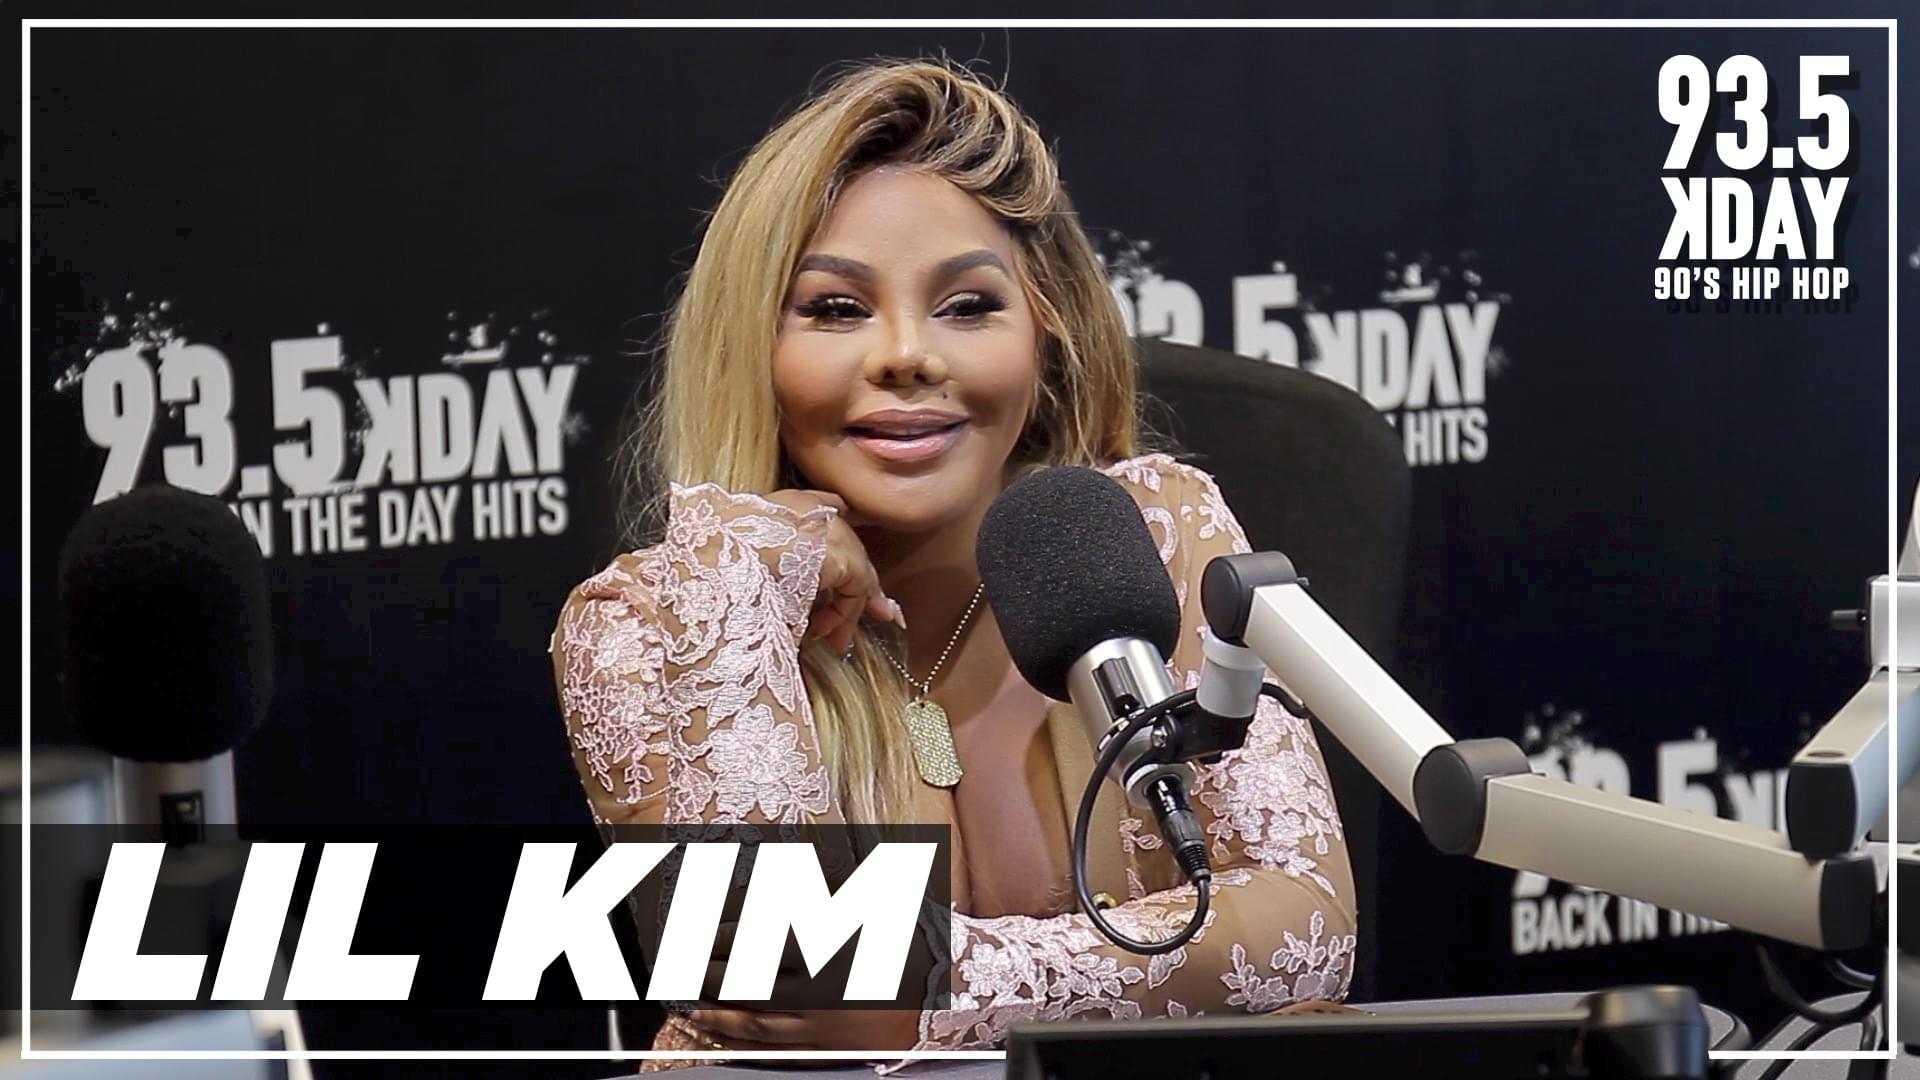 Lil Kim’s Last Words With Biggie, Relationship w/ Left Eye of TLC, Wanting To Be an Architect, And New Music